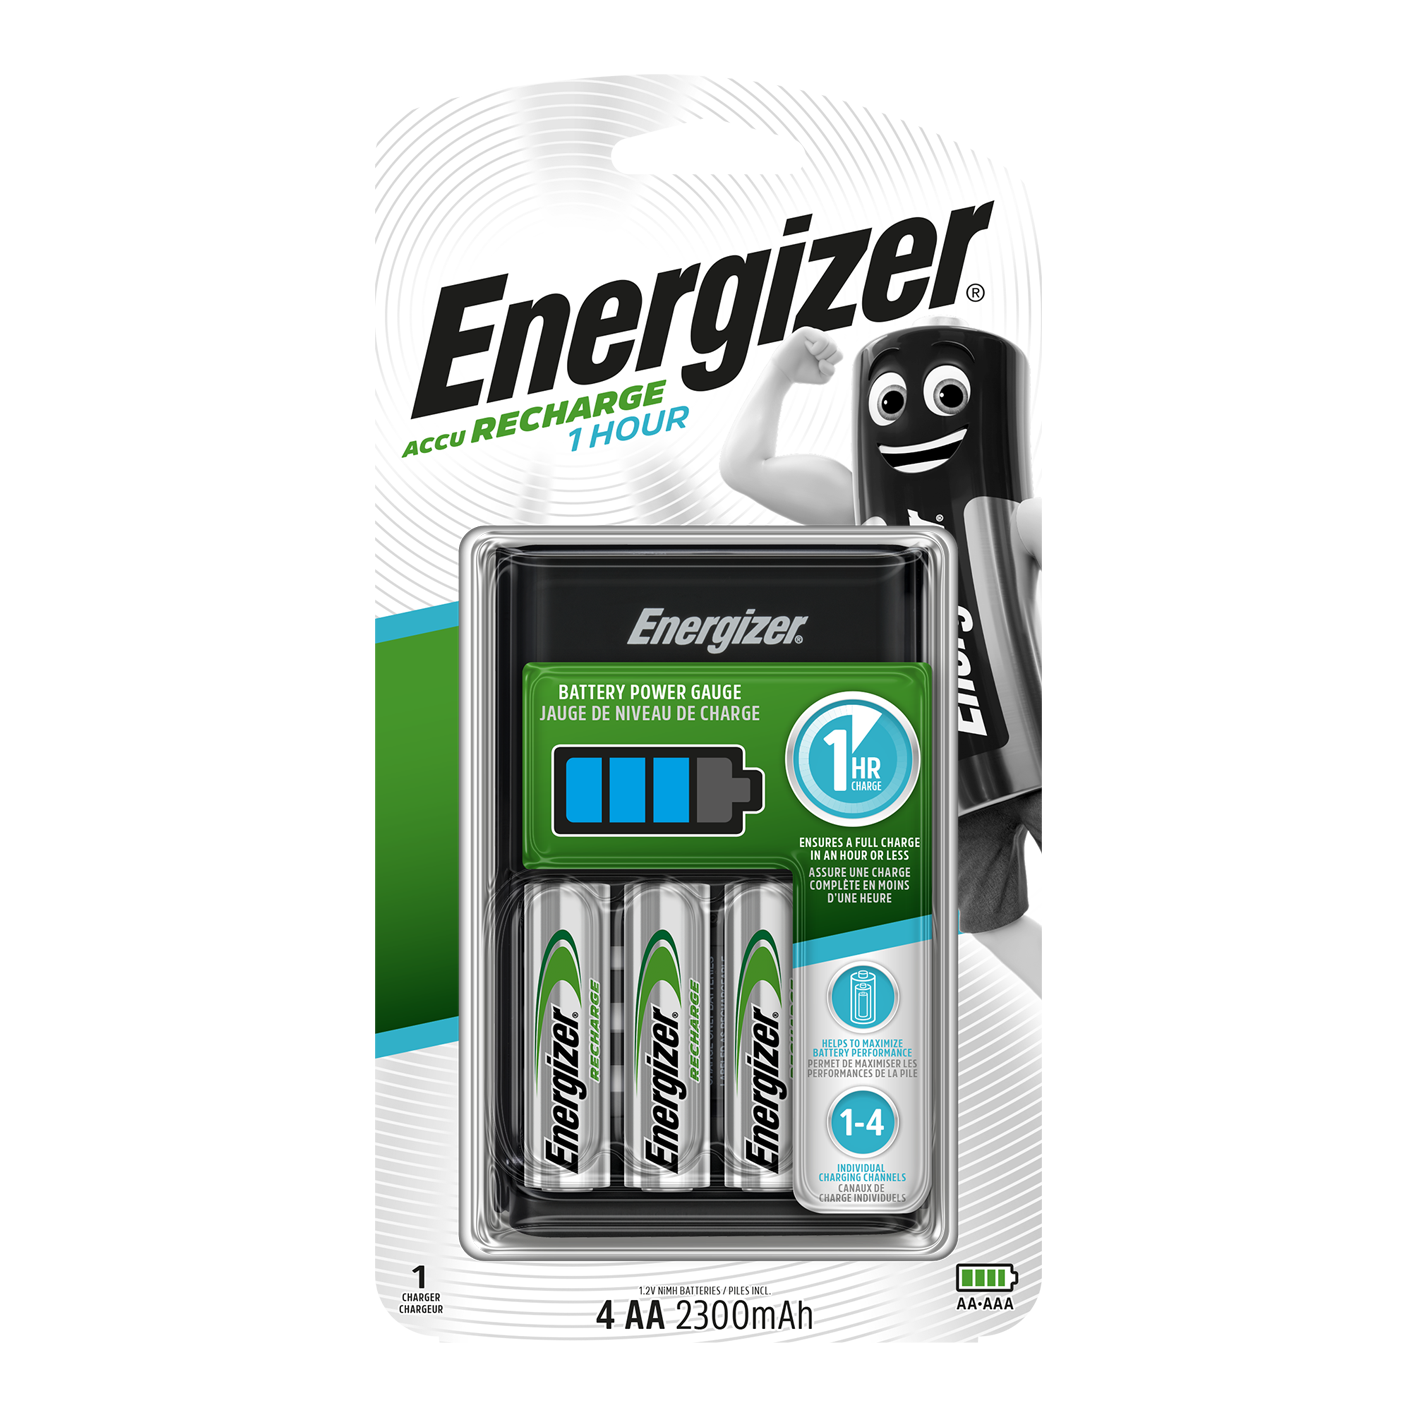 Energizer 1 Hour Charger With 4 x AA 2300mAh Batteries